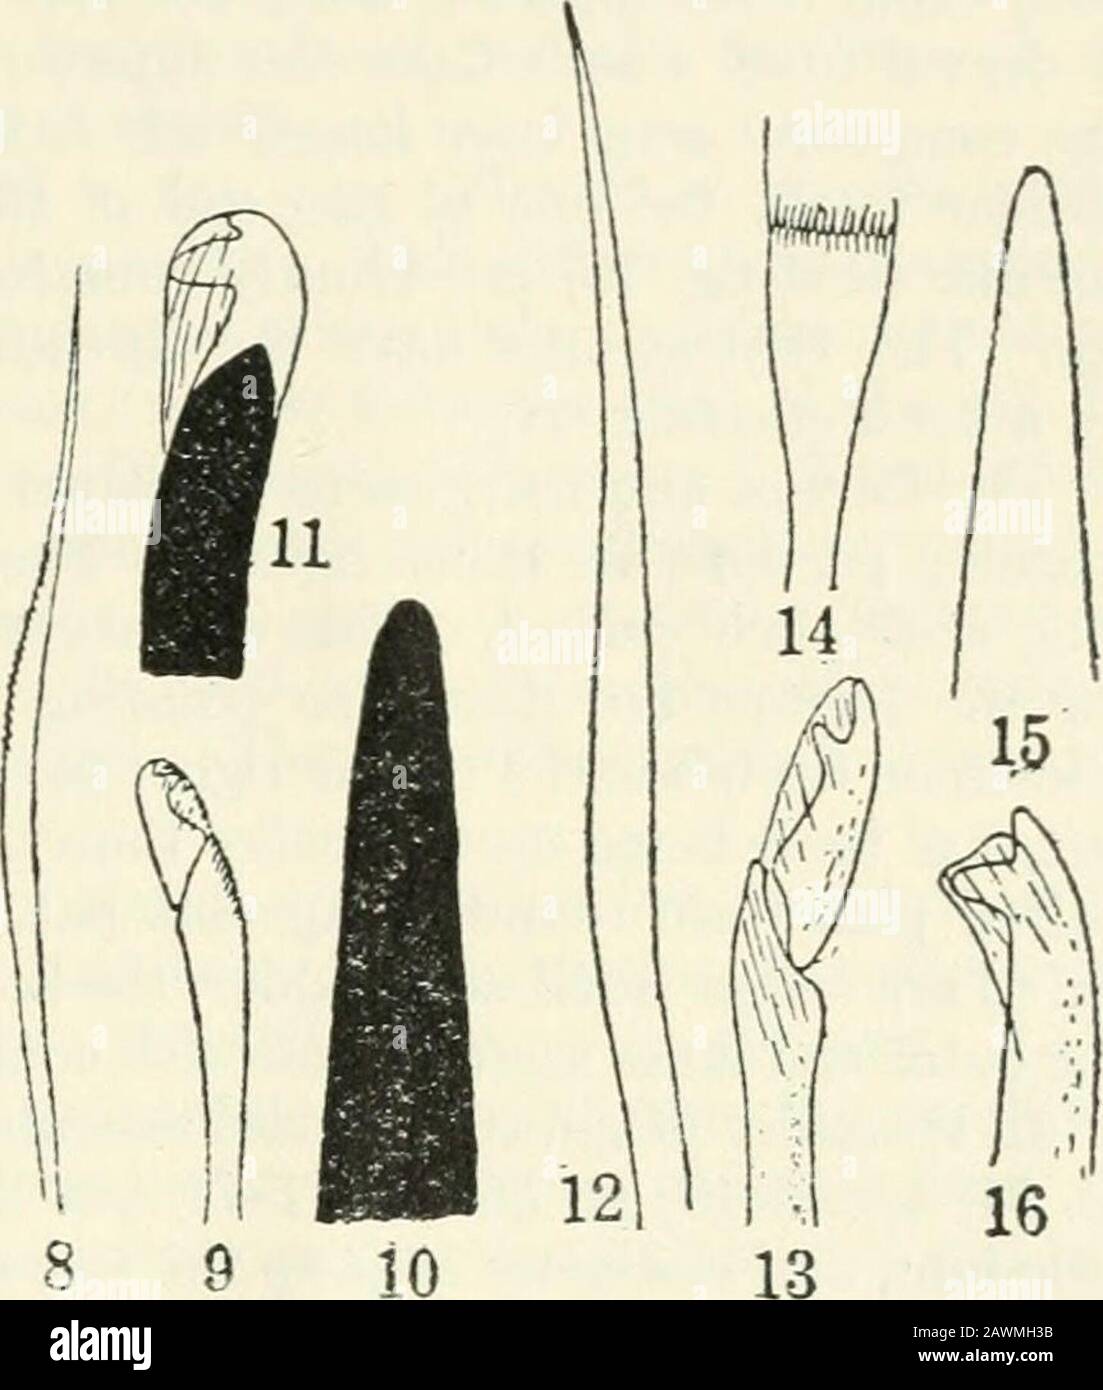 Papers . very prominent setal portion, with adense tuft of compound setse ventrally and a smaller tuft of simple setse dorsally.There is a needle acicula in the dorsal cirrus. The dorsal cirrus is slender, butthe ventral one is short and thick and merges gi-adually into the ventral pad-likeswelling characteristic of the anterior parapodia in this genus, but especially prom-inent here. A later parapodium from behind the middle of the body (plate 2,fig. 4) has a conical setal portion with a prominent ventral swelling, carrying the short,thick ventral cirrus on its outer end. The dorsal cirrus is Stock Photo